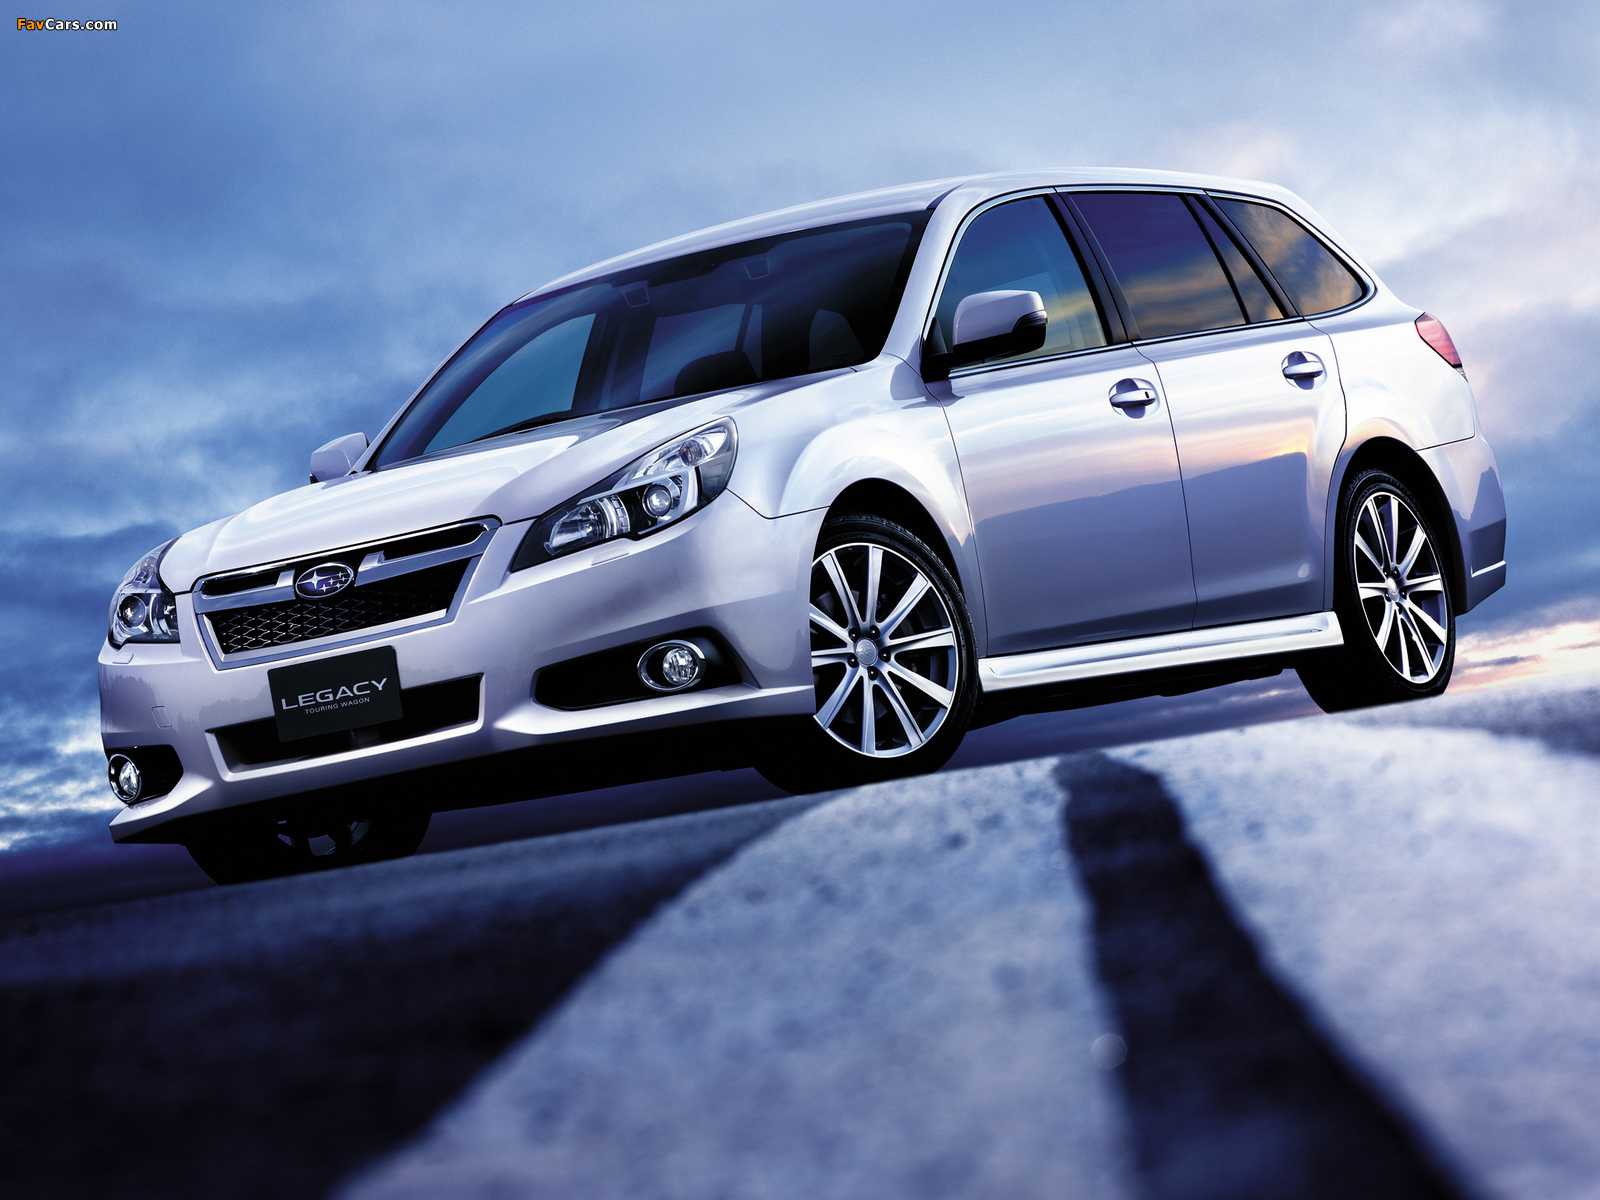 Subaru Legacy 2.5i-S Touring Wagon (BR) 2012 pictures (1600 x 1200)